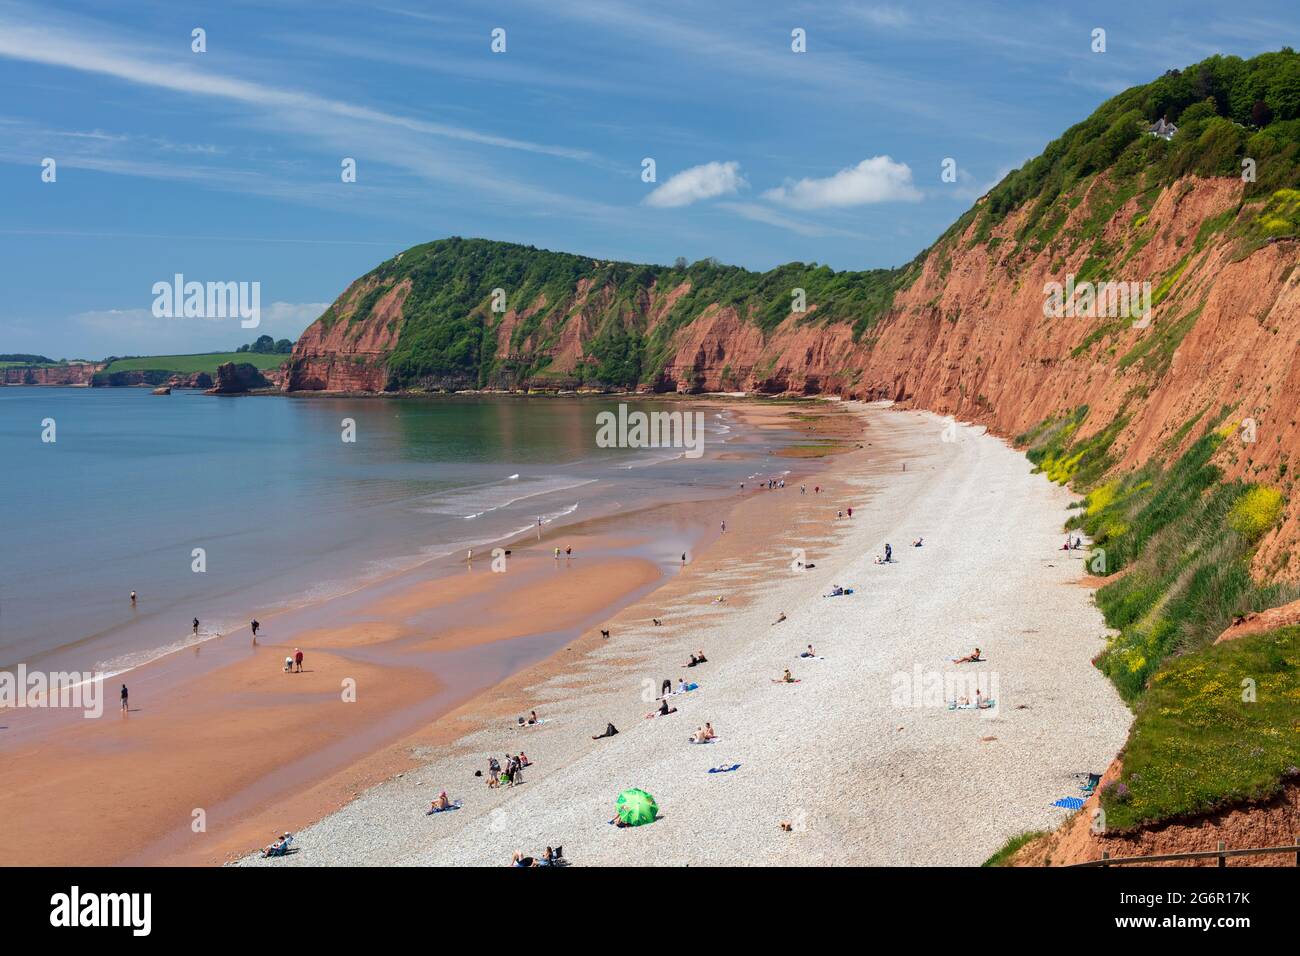 Jacob's Ladder Sidmouth beach viewed from Connaught Gardens, Sidmouth, Jurassic Coast, Devon, England, United Kingdom, Europe Stock Photo